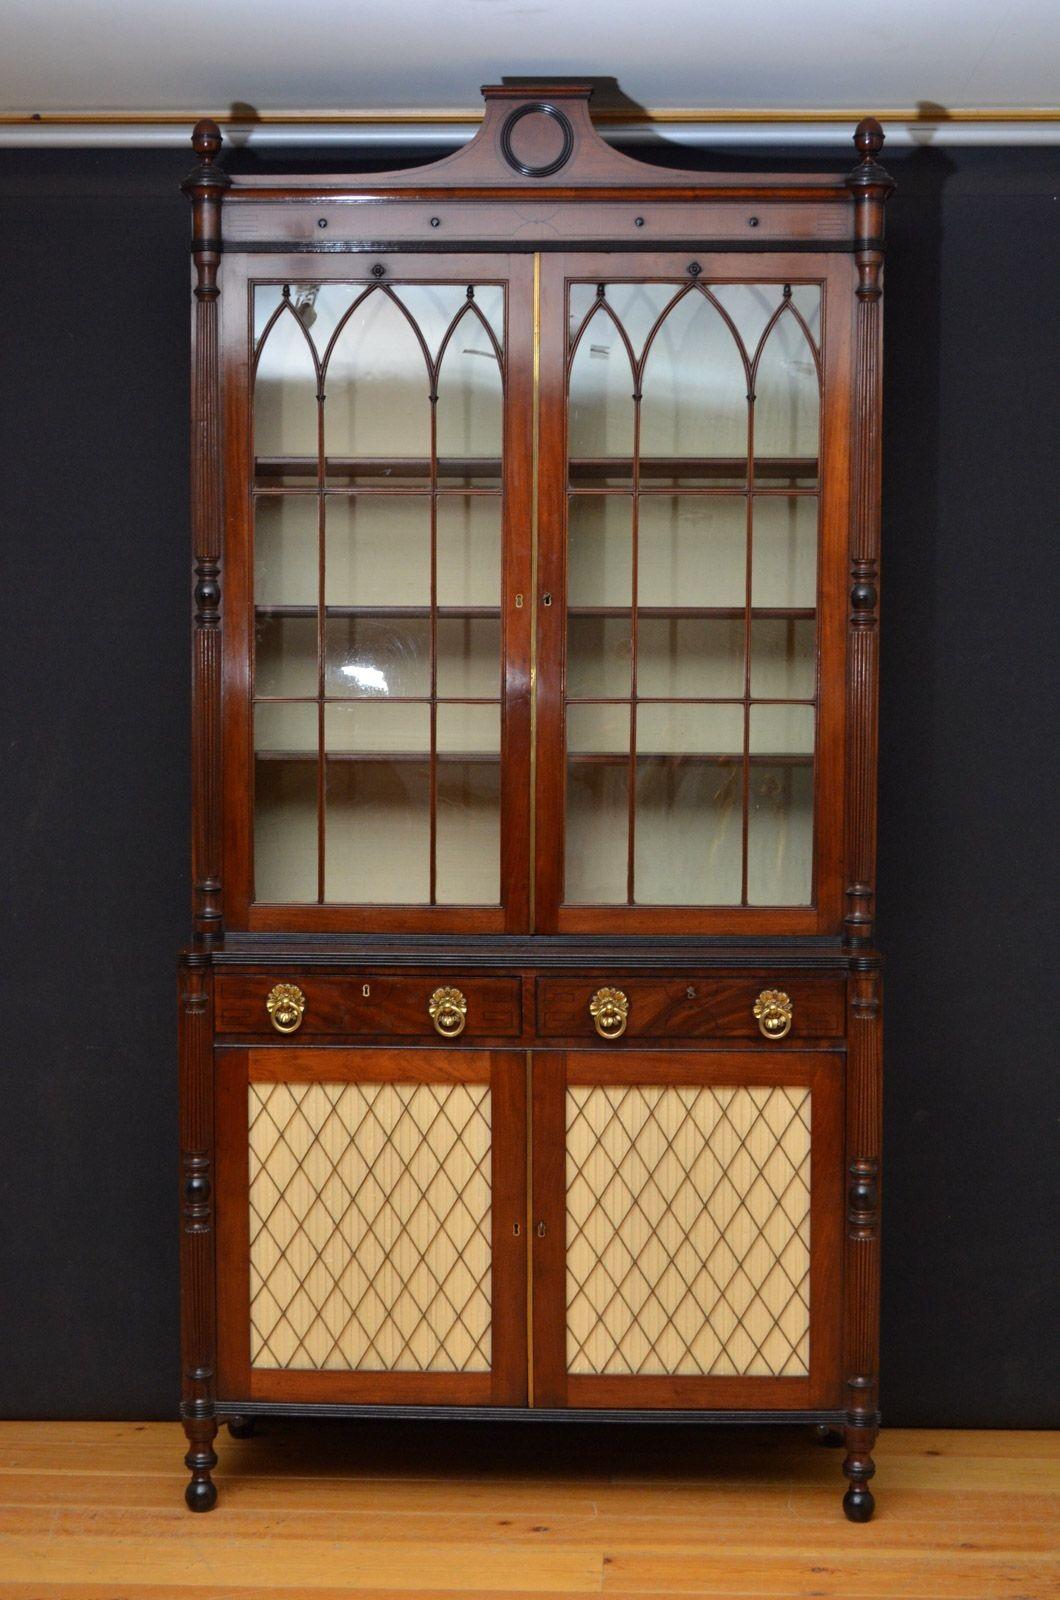 Sn4543 A large Regency bookcase in mahogany, having architectural pediment above string inlaid flamed mahogany frieze and a pair of astragal glazed doors enclosing 8 height adjustable shelves and fitted with original working lock and a key, all